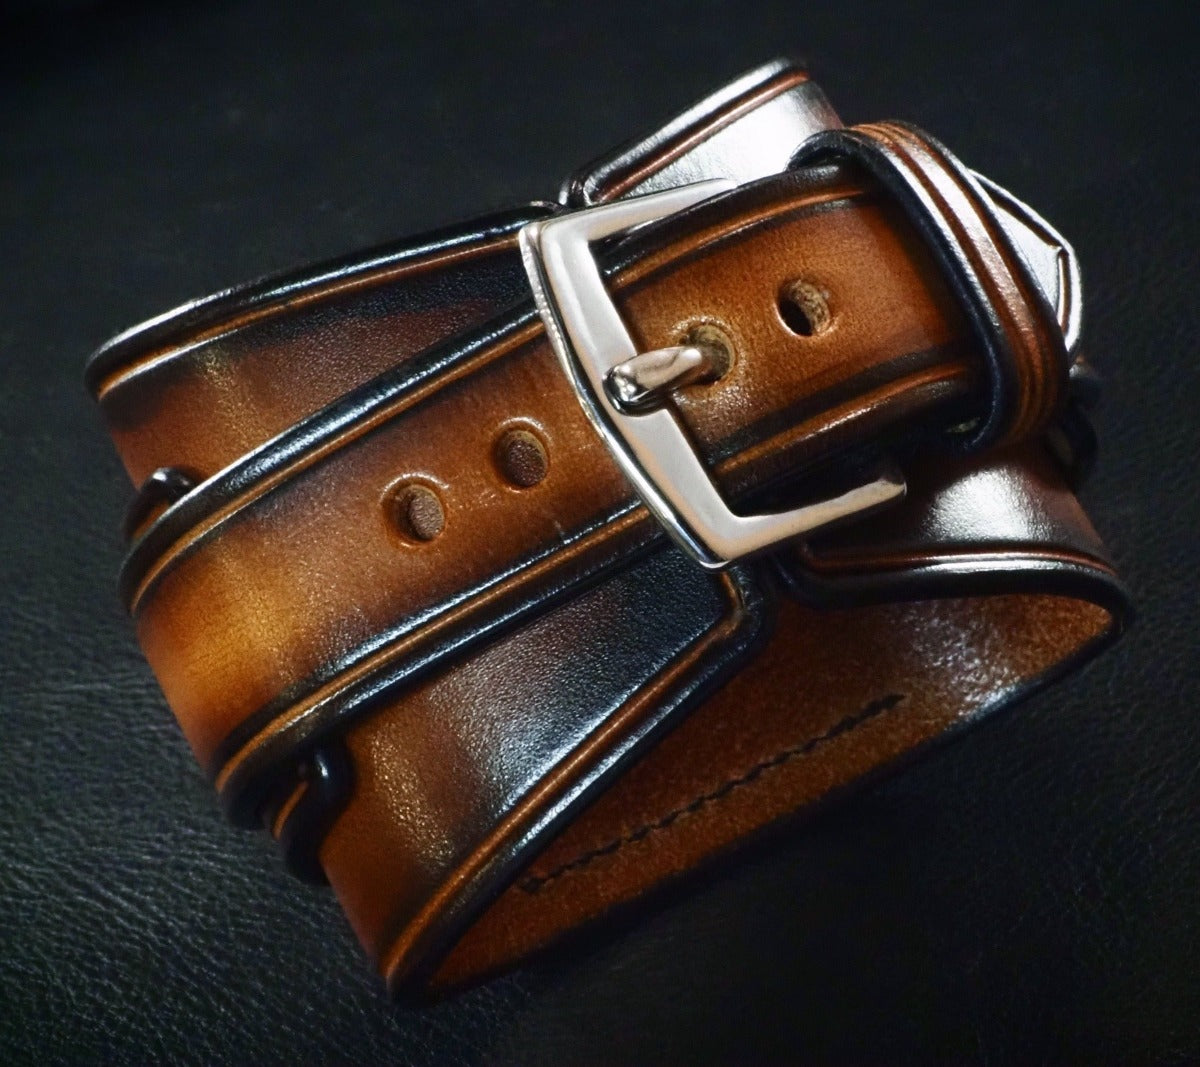 Sunburst Leather cuff watch : Rich tones layered leather watchband. Hand Made In New York